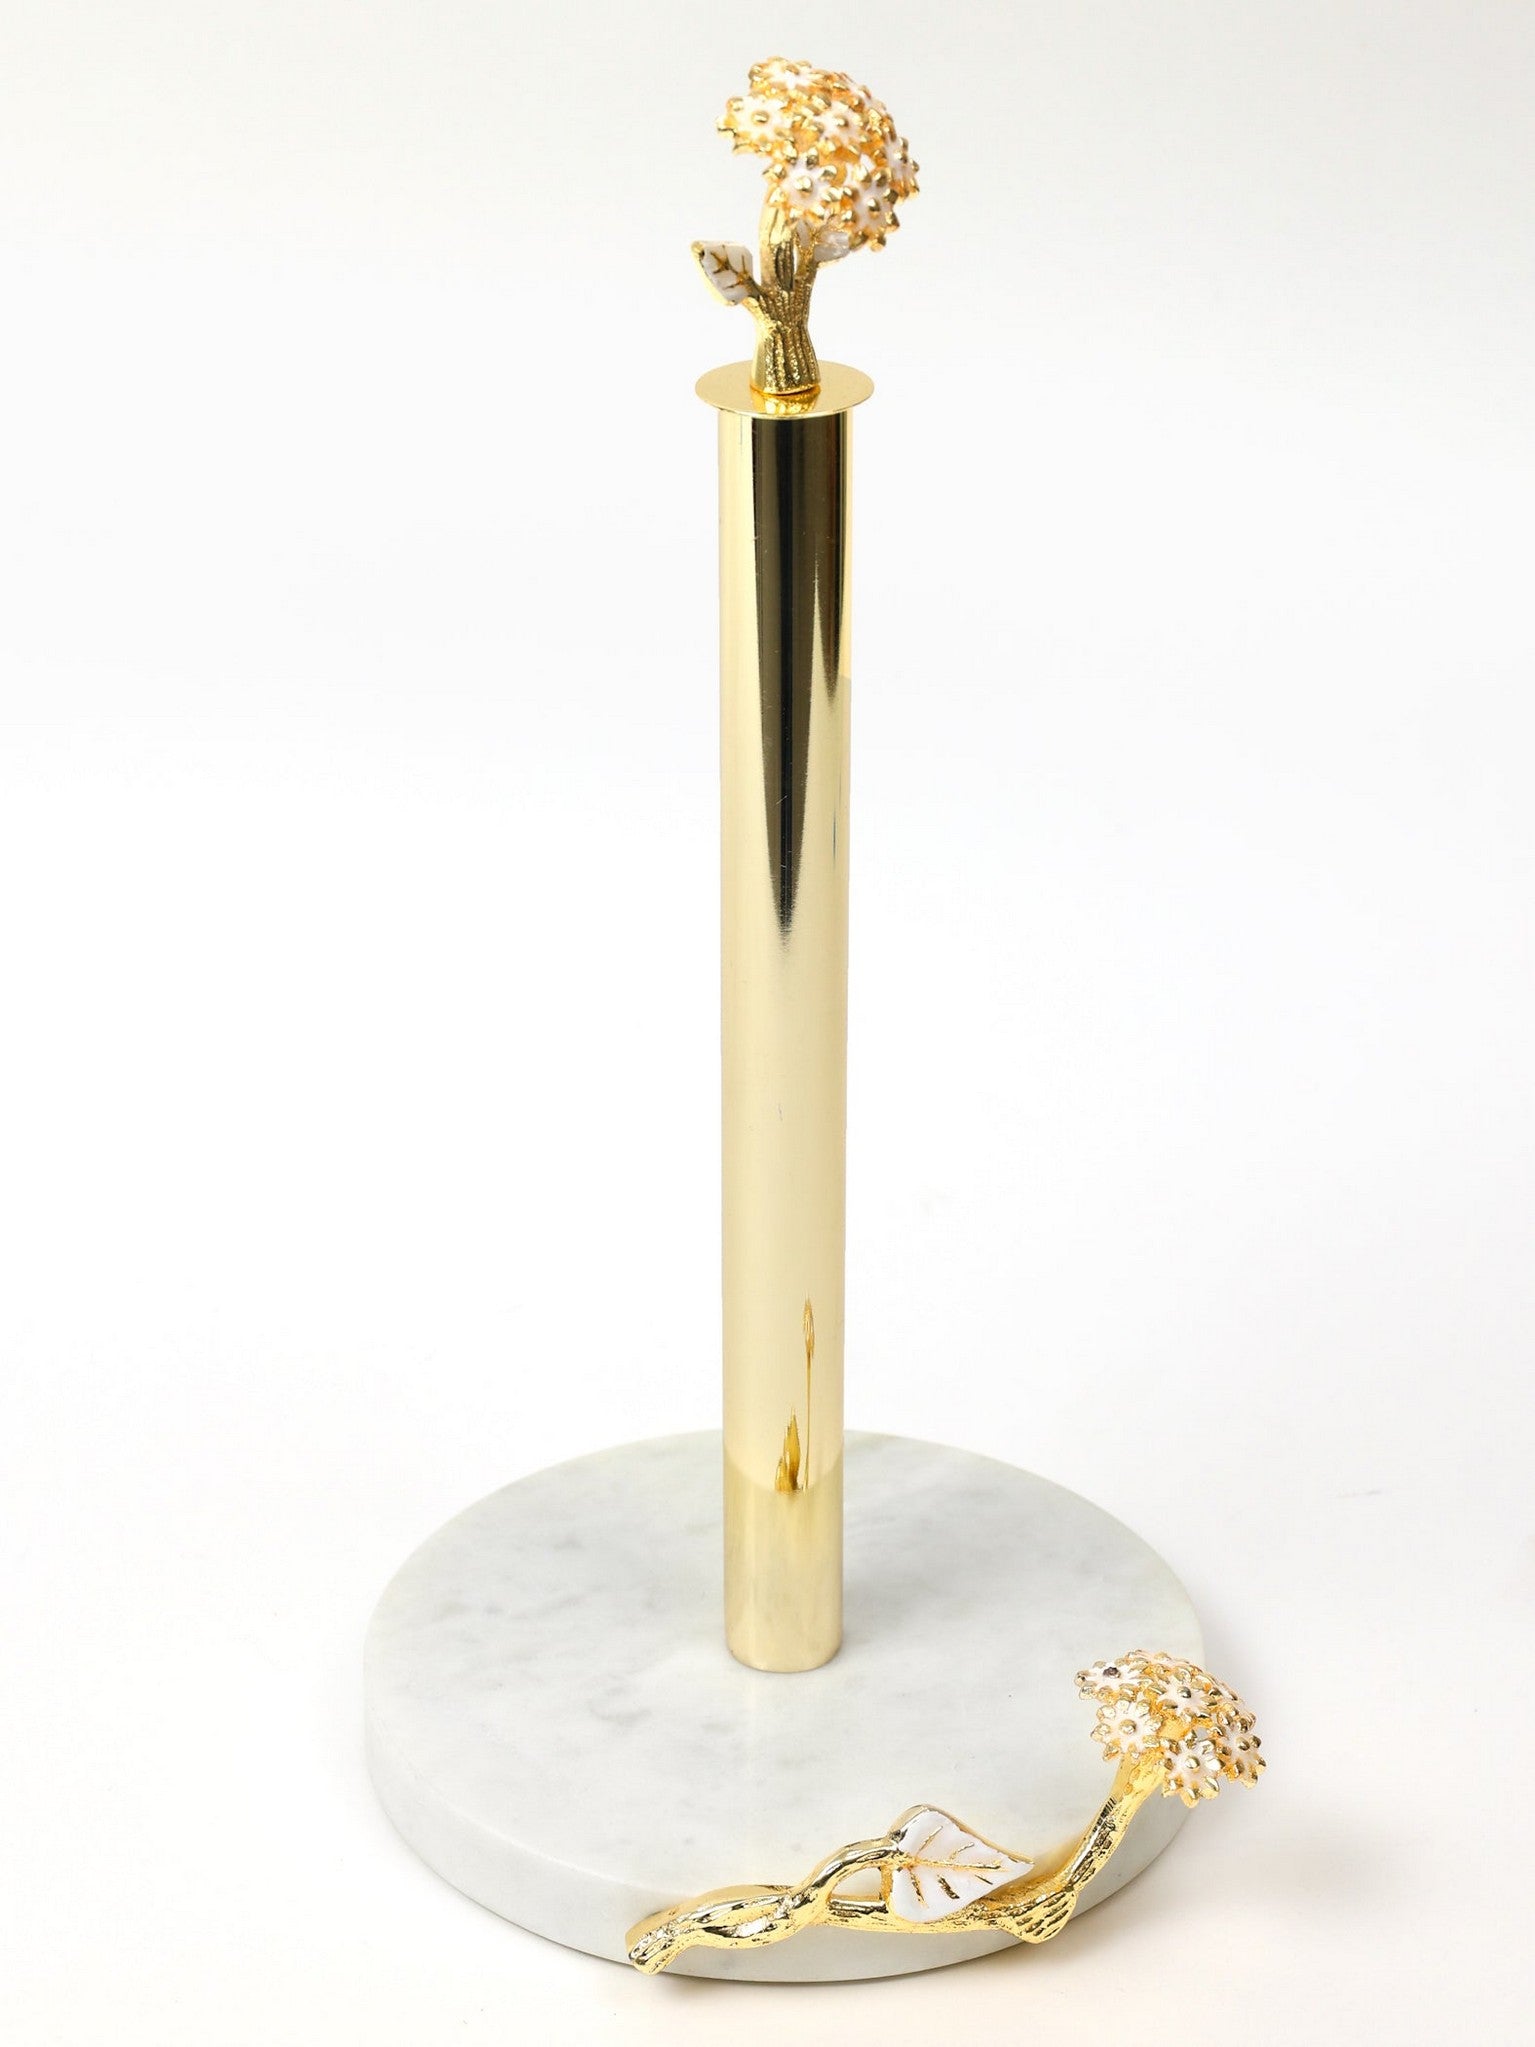 Kitchen Paper Towel Holder - Gold Tree Design with Marble Base